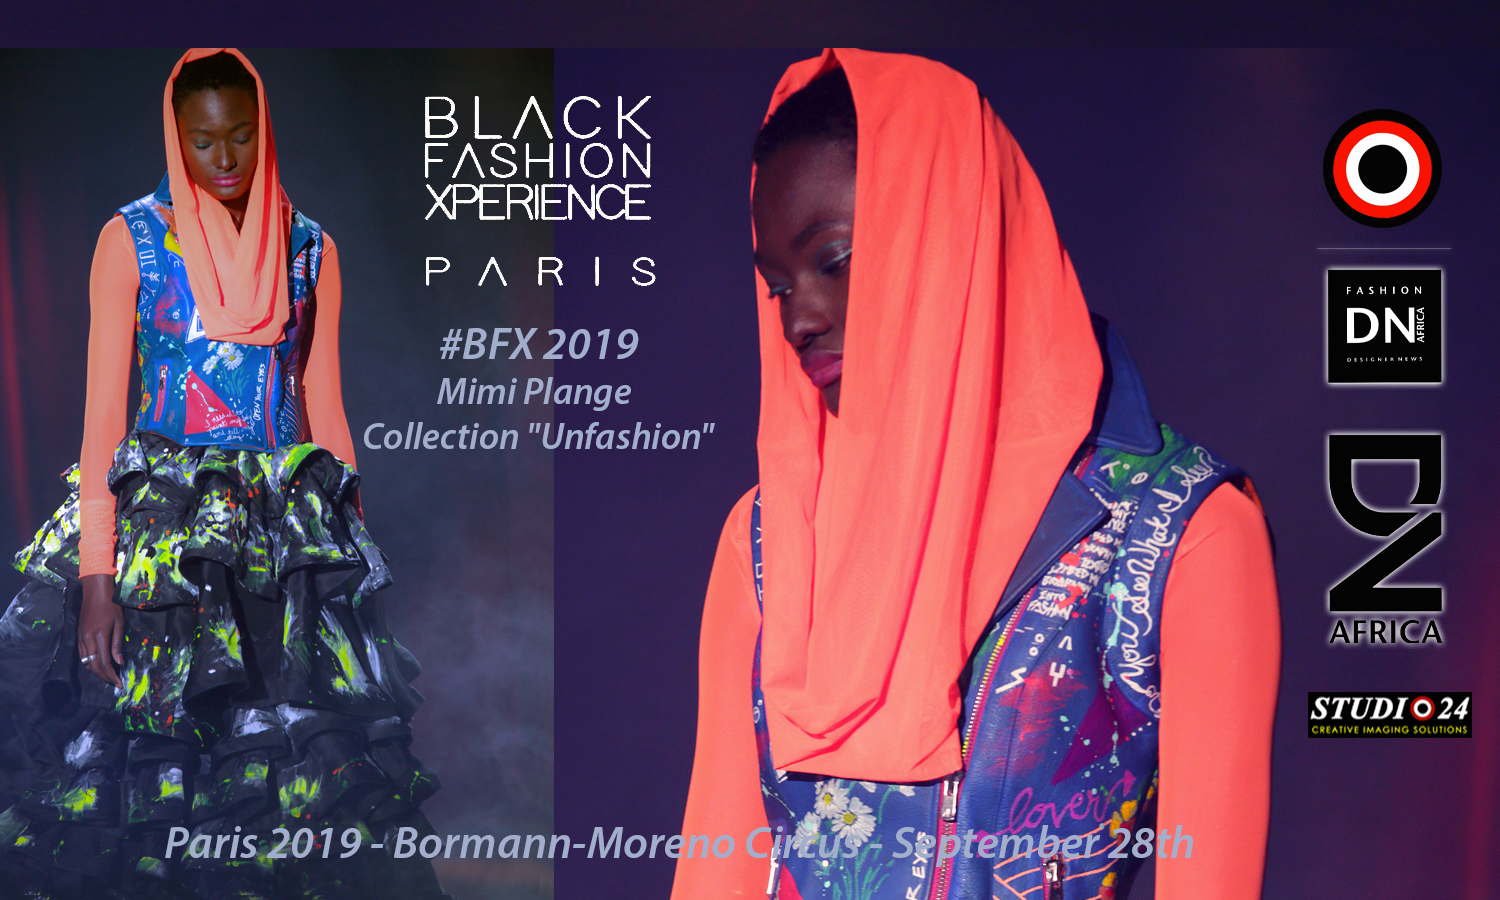 AFRICAN FASHION STYLE MAGAZINE - Black-Fashion-Xperience-2019-Organizer by Adama-Paris - Designer Mimi Plange - - Collection "Unfashion" - PR Indirâh Events and Communication - Photographer DAN NGU - Official Media Partner DN AFRICA - STUDIO 24 NIGERIA - STUDIO 24 INTERNATIONAL - Ifeanyi Christopher Oputa MD AND CEO OF COLVI LIMITED AND STUDIO 24 - CHEVEUX CHERIE and CHEVEUX CHERIE STUDIO BY MARIEME DUBOZ- Fashion Editor Nahomie NOOR COULIBALY